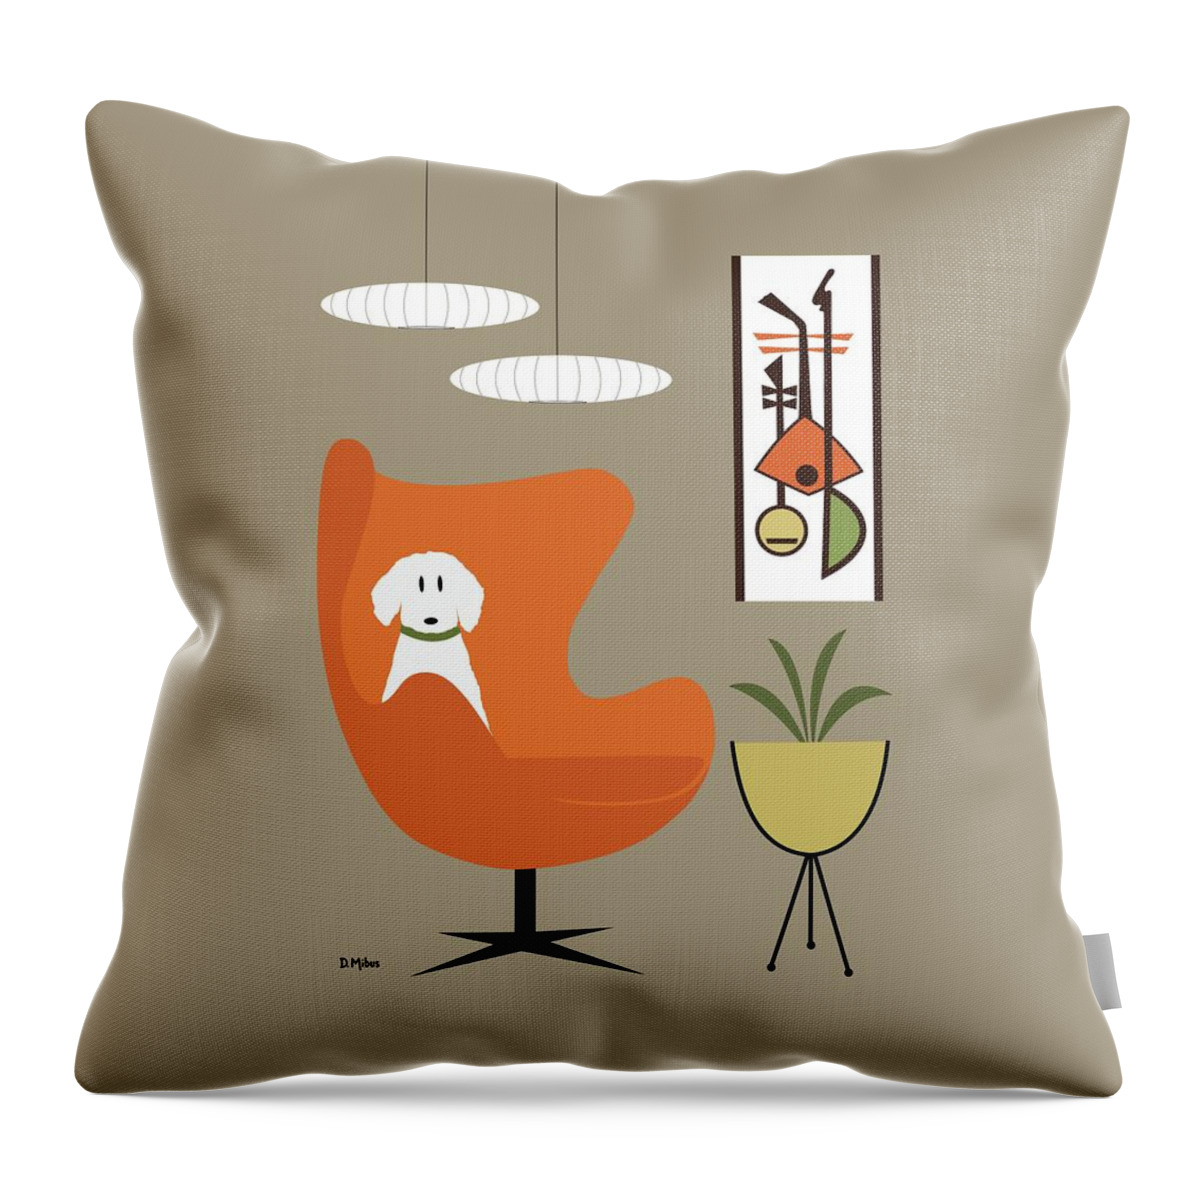 Mid Century Modern Throw Pillow featuring the digital art Mid Century White Dog in Orange Egg Chair by Donna Mibus